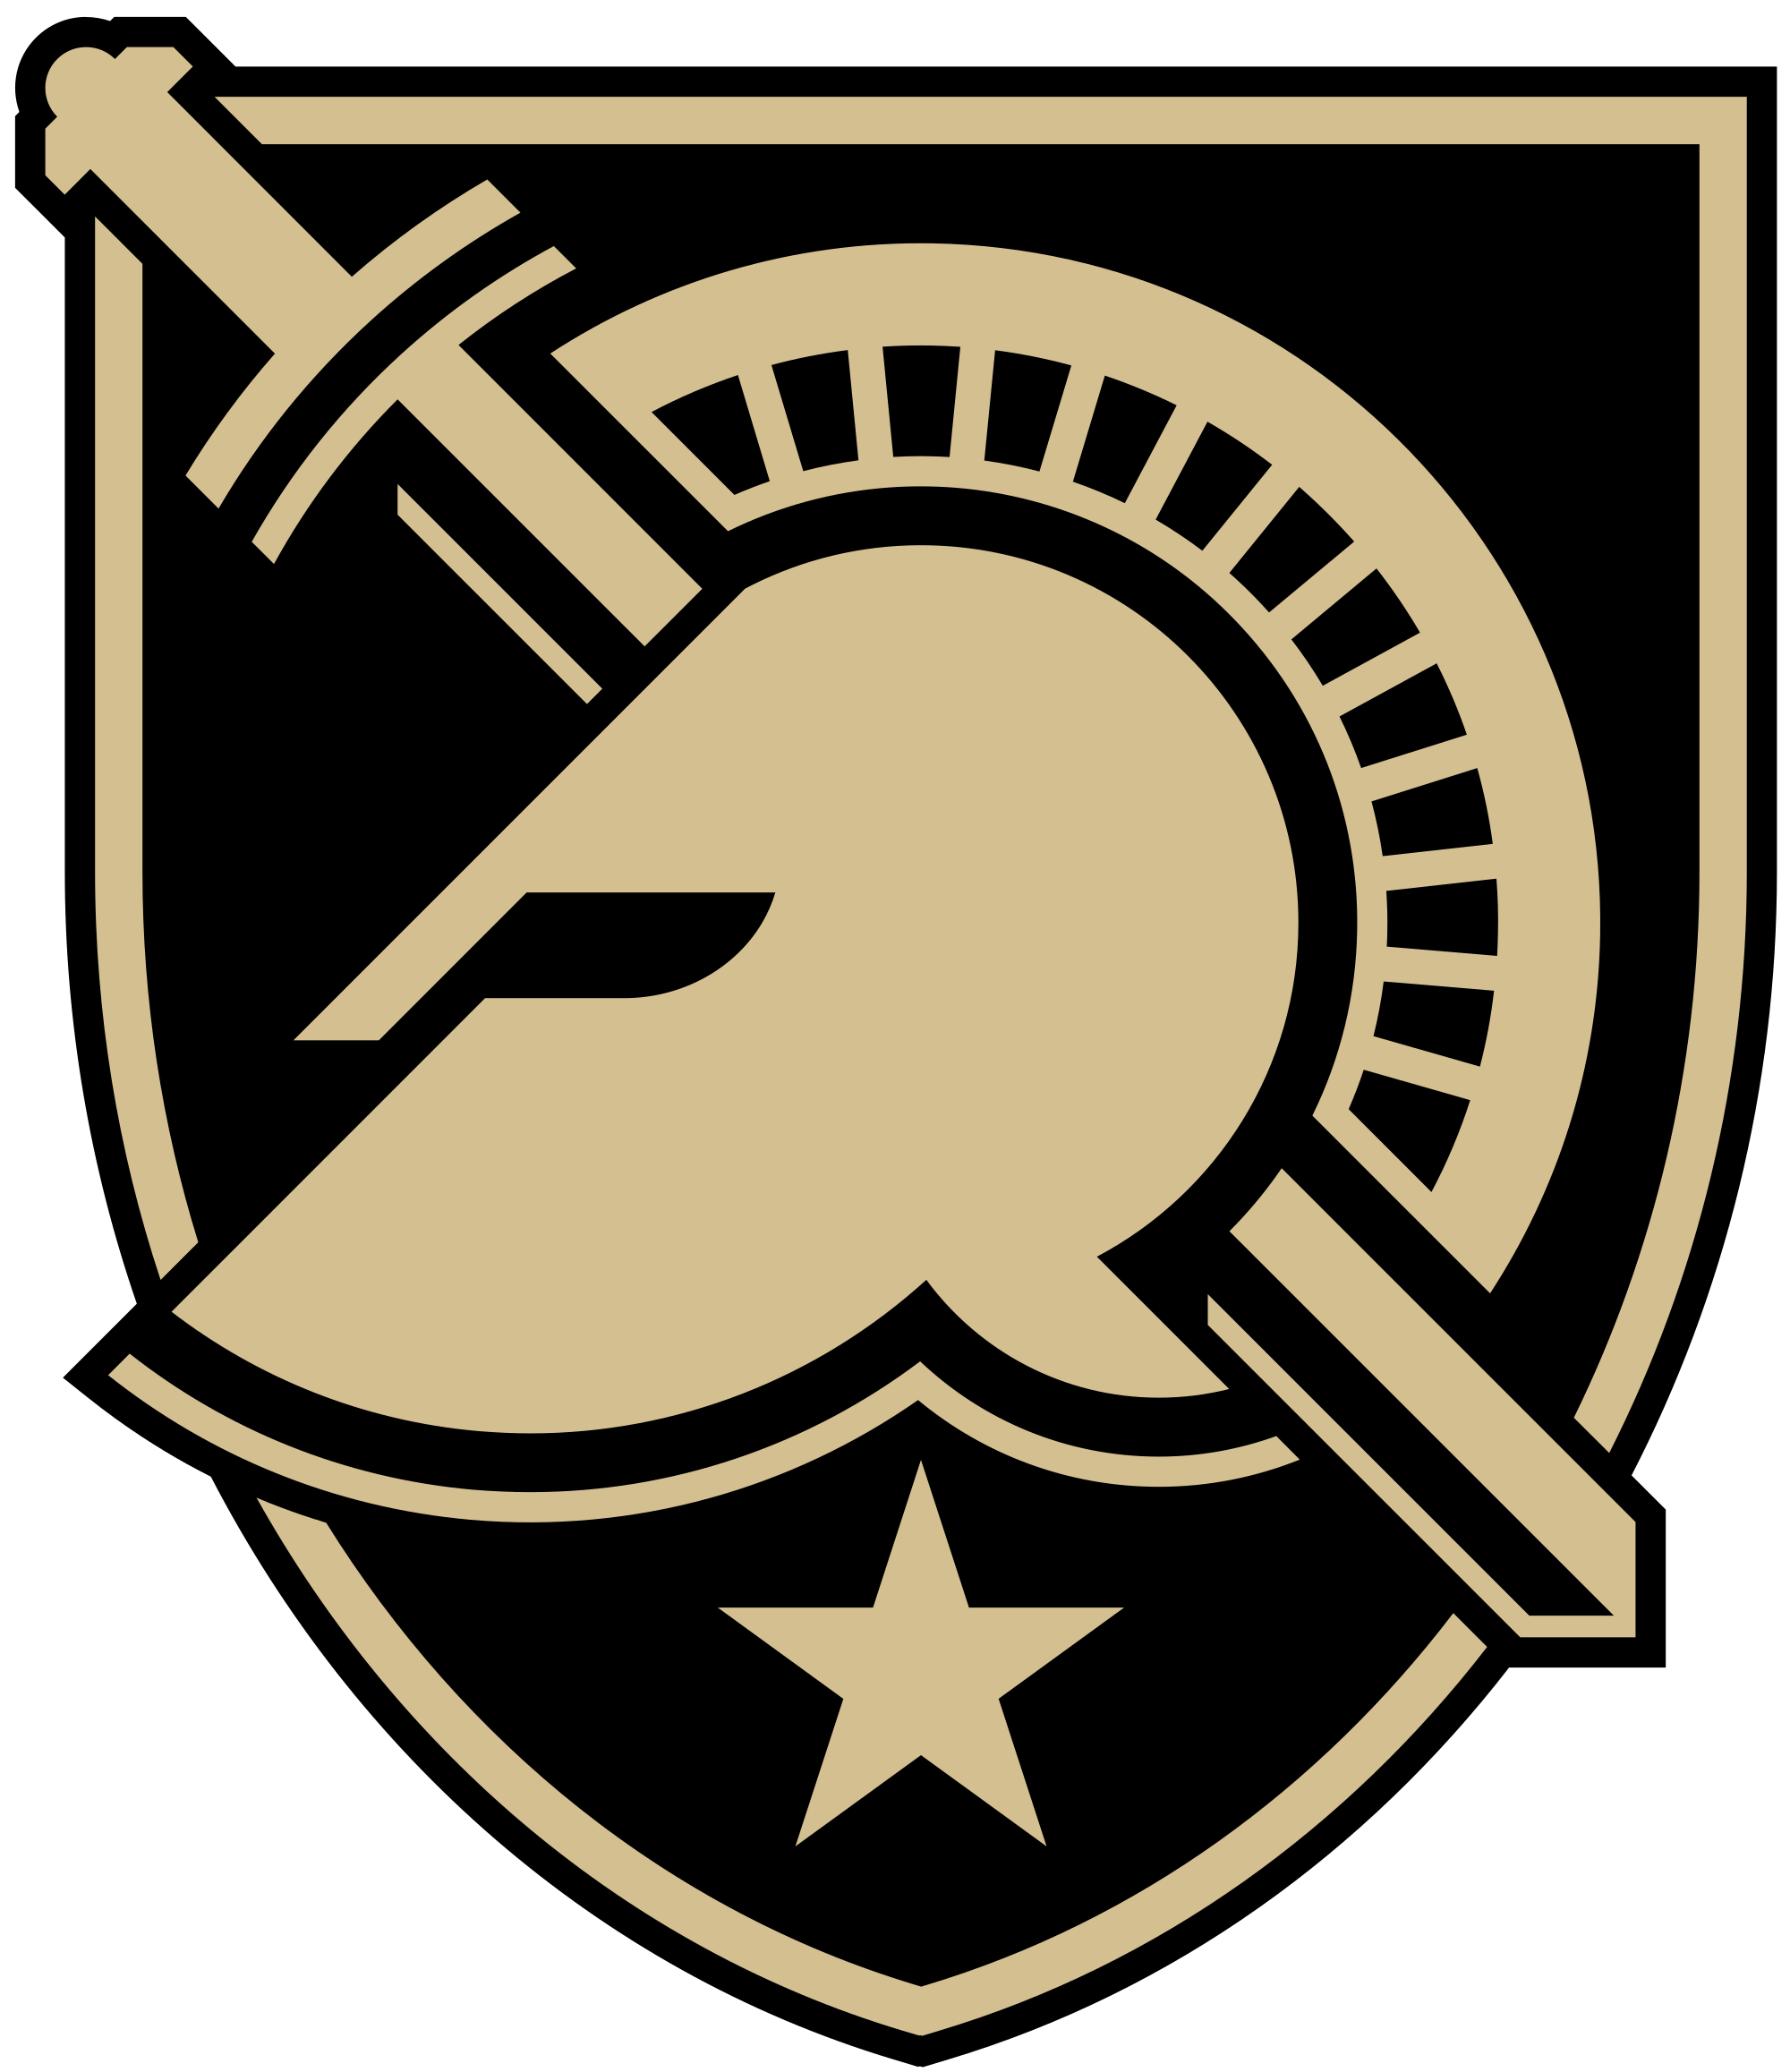 Air Force College Football Logo - Air Force Falcons vs. Army West Point Black Knights Prediction